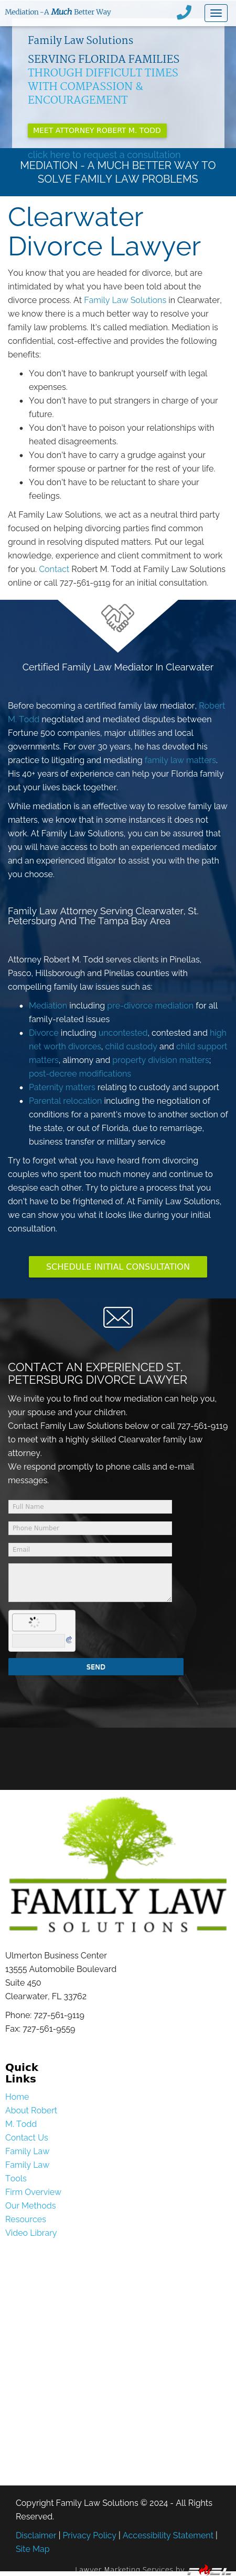 Family Law Solutions - Clearwater FL Lawyers